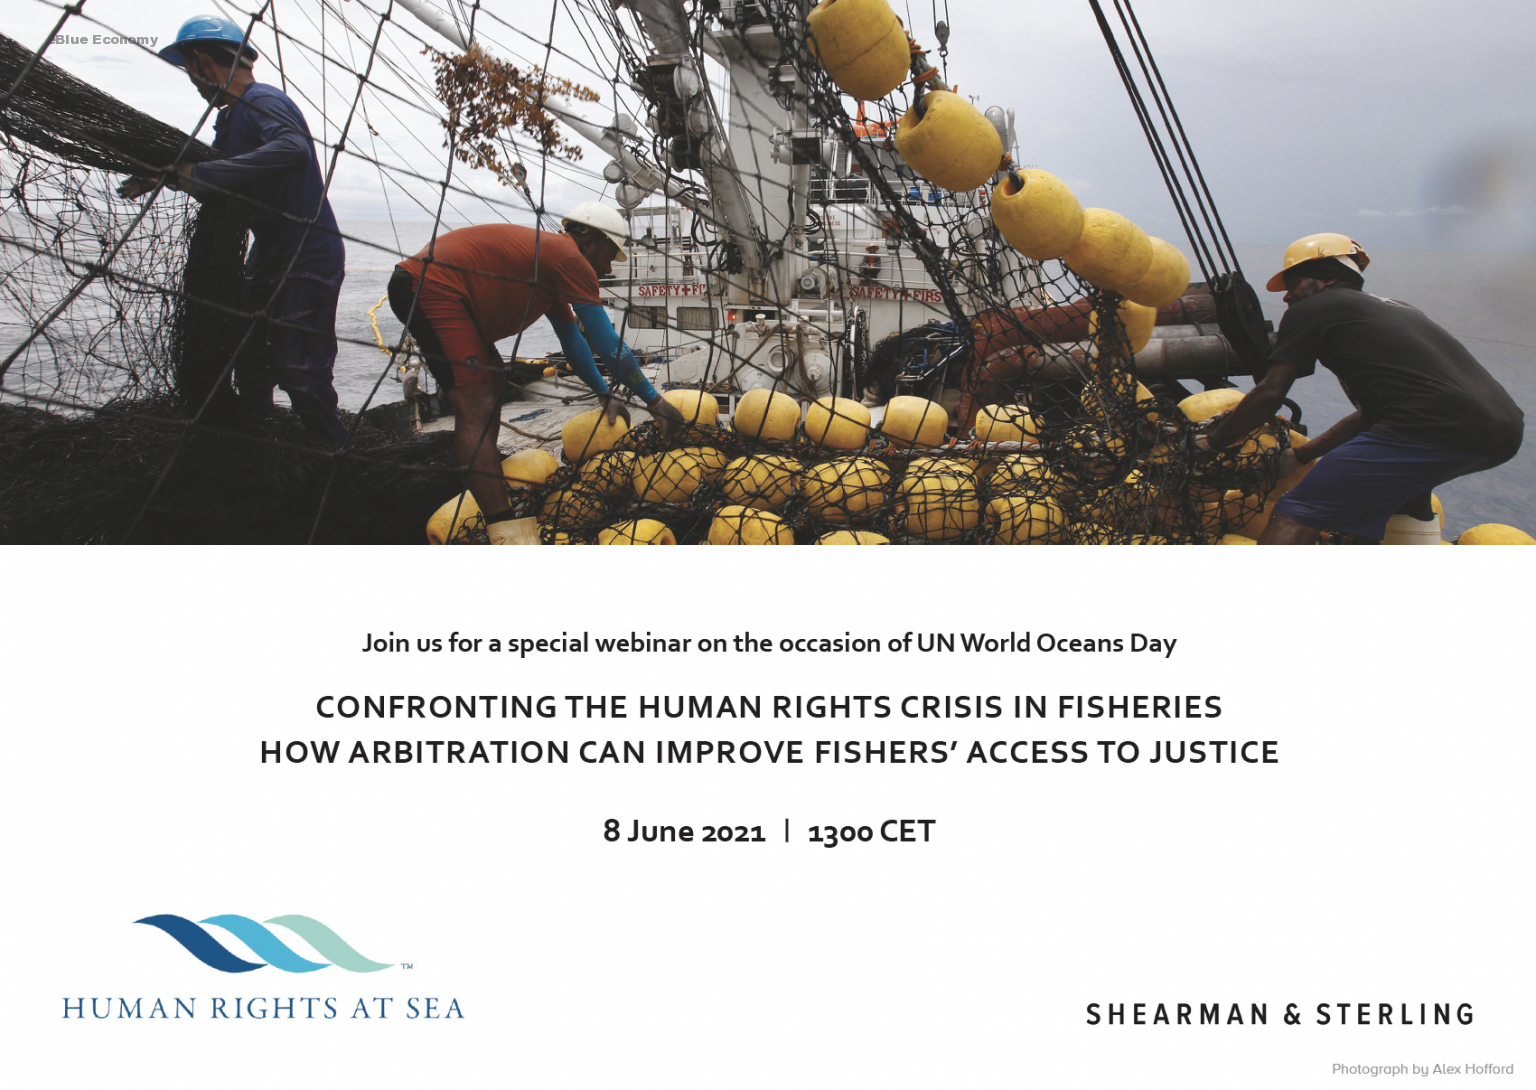 eBlue_economy_Confronting _the Human Rights_Crisis in Fisheries